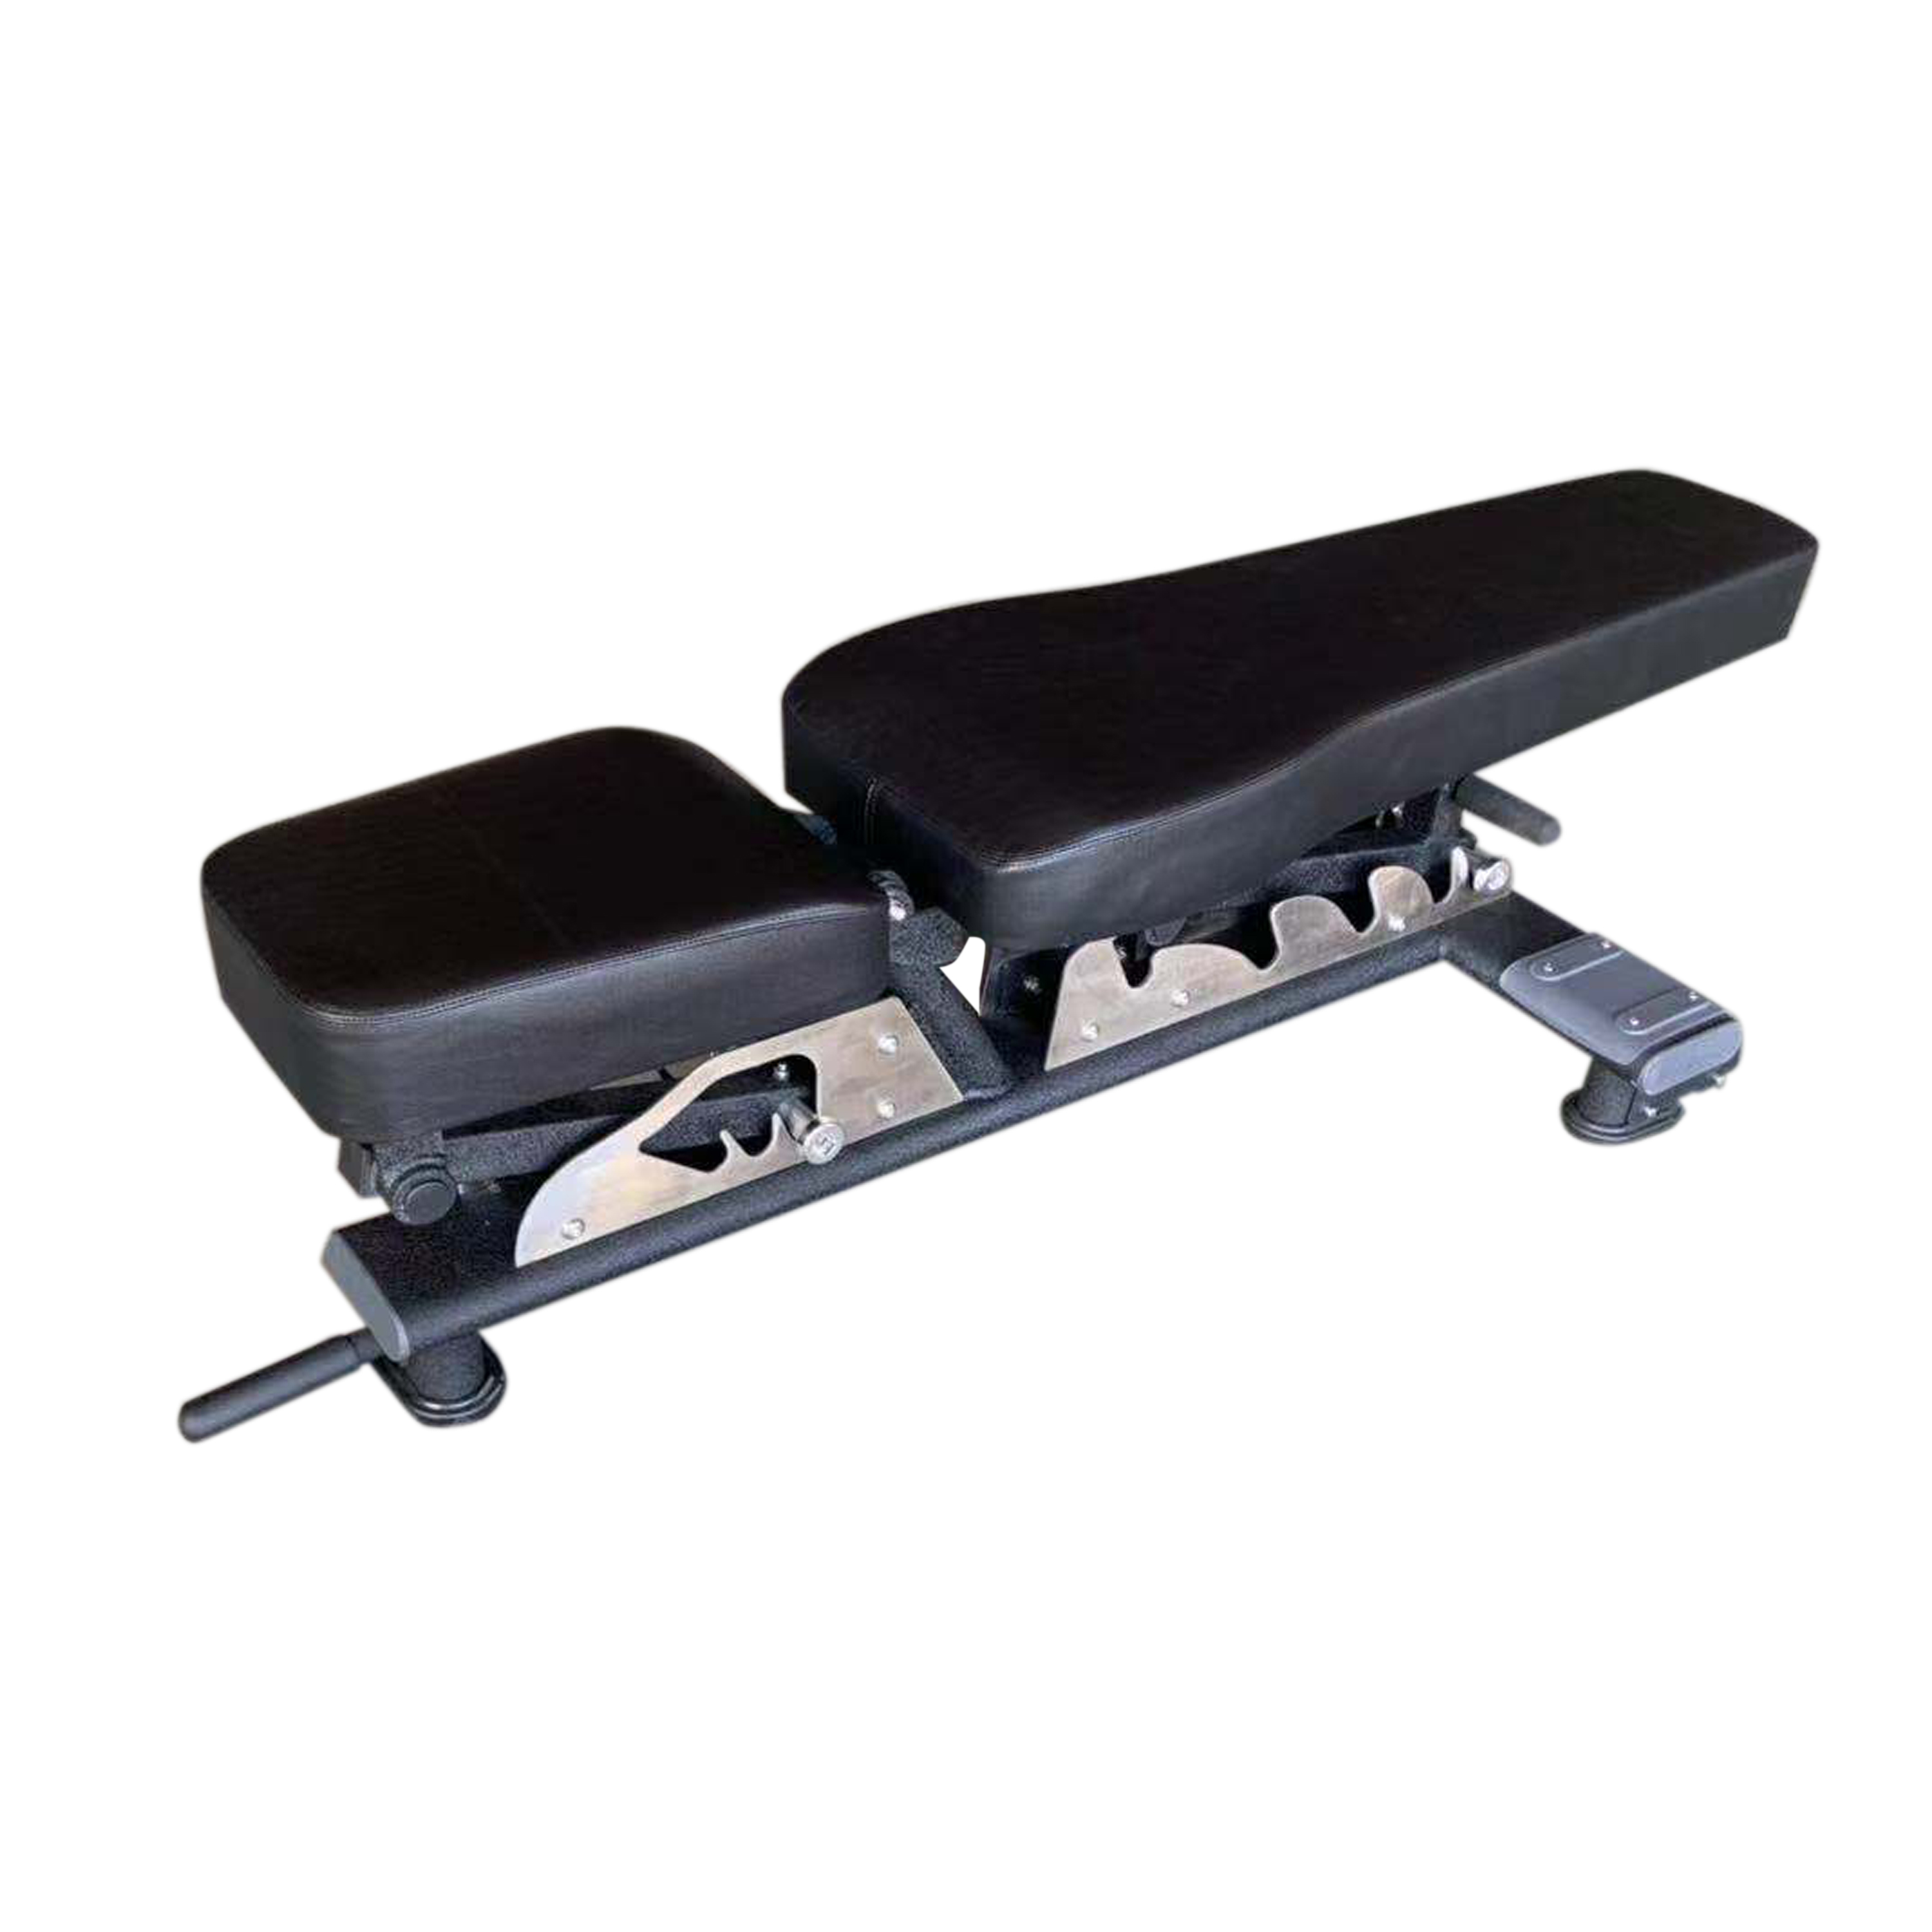 Strength Training Adjustable Flat / Incline 2 in 1 Gym Bench Press 